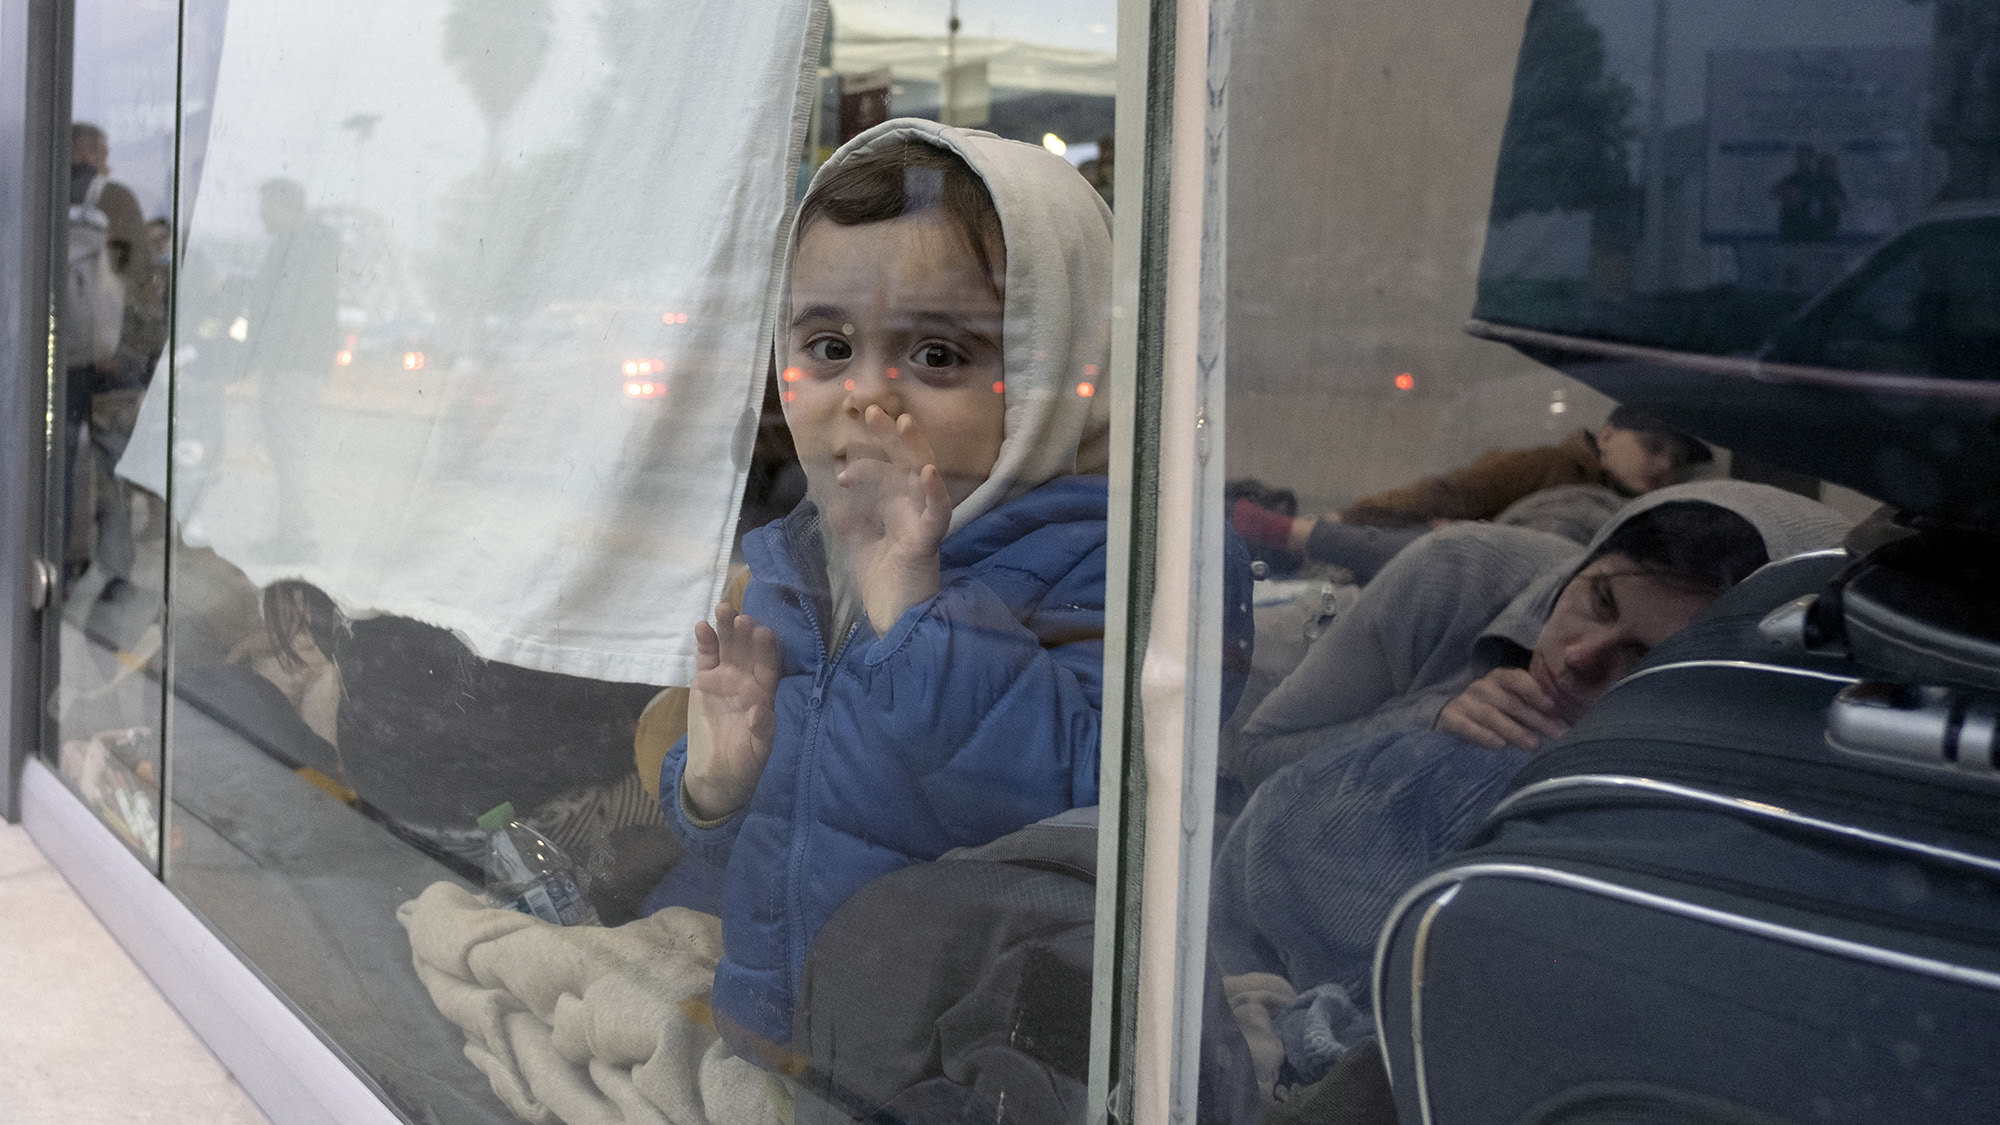 A Ukrainian child seeking asylum in the United States is seen inside a bus station on the Mexican side of the San Ysidro crossing port in Tijuana, Mexico on April 2.